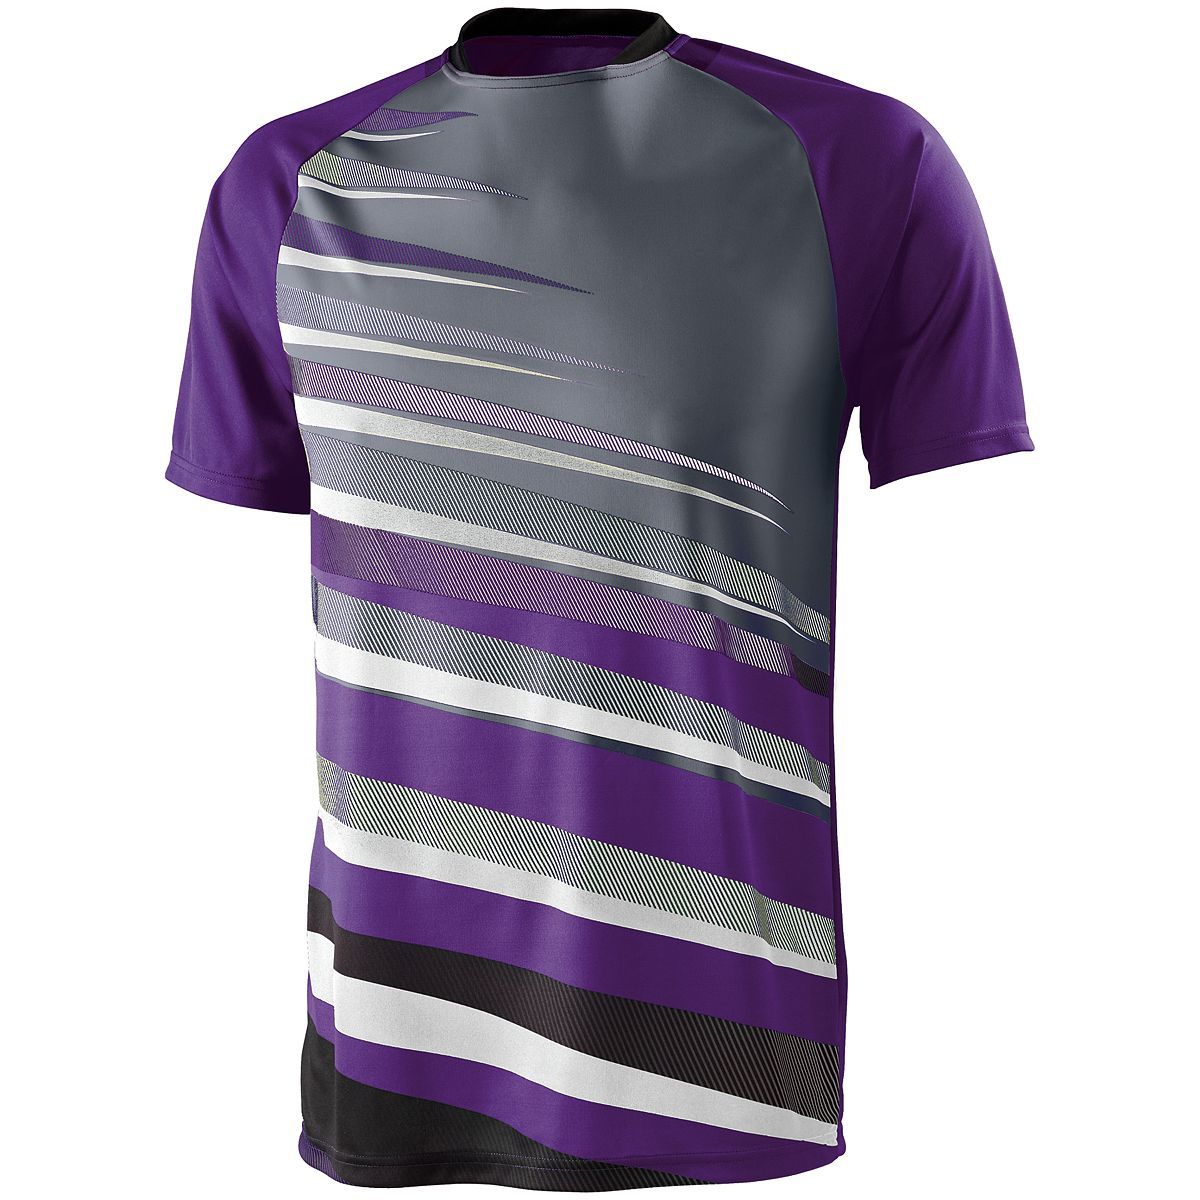 High 5 Youth Galactic Jersey in Purple/Black/Graphite  -Part of the Youth, Youth-Jersey, High5-Products, Soccer, Shirts, All-Sports-1 product lines at KanaleyCreations.com